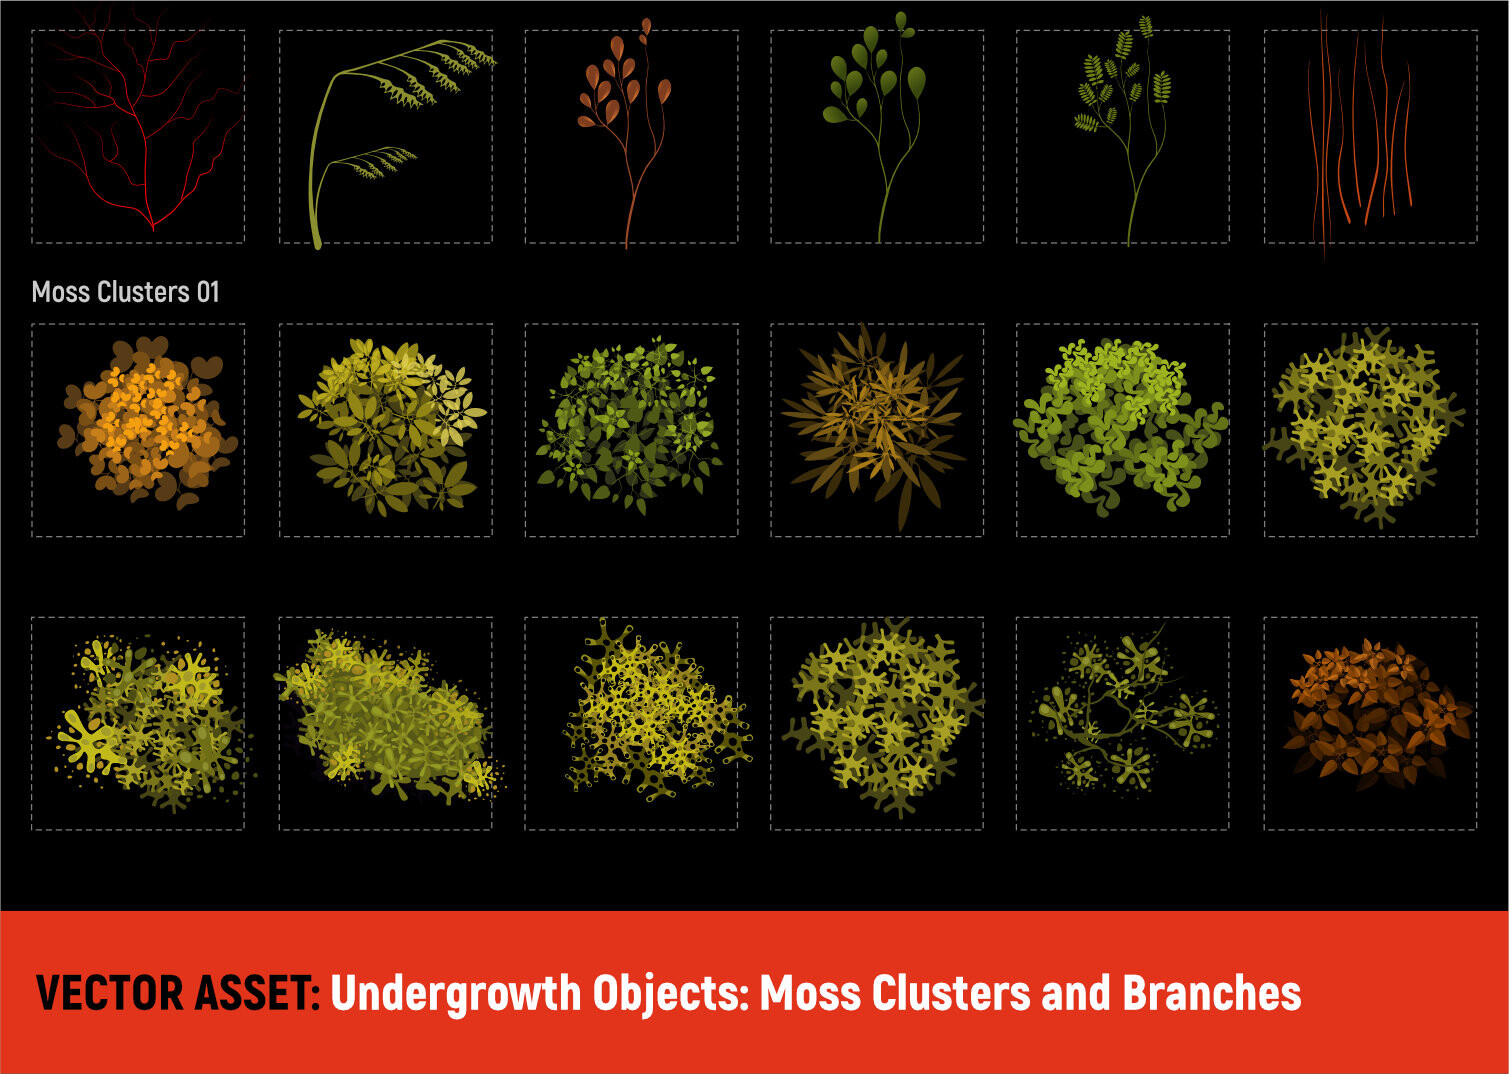 Undergrowth Vector Objects
Moss Clusters and Branches